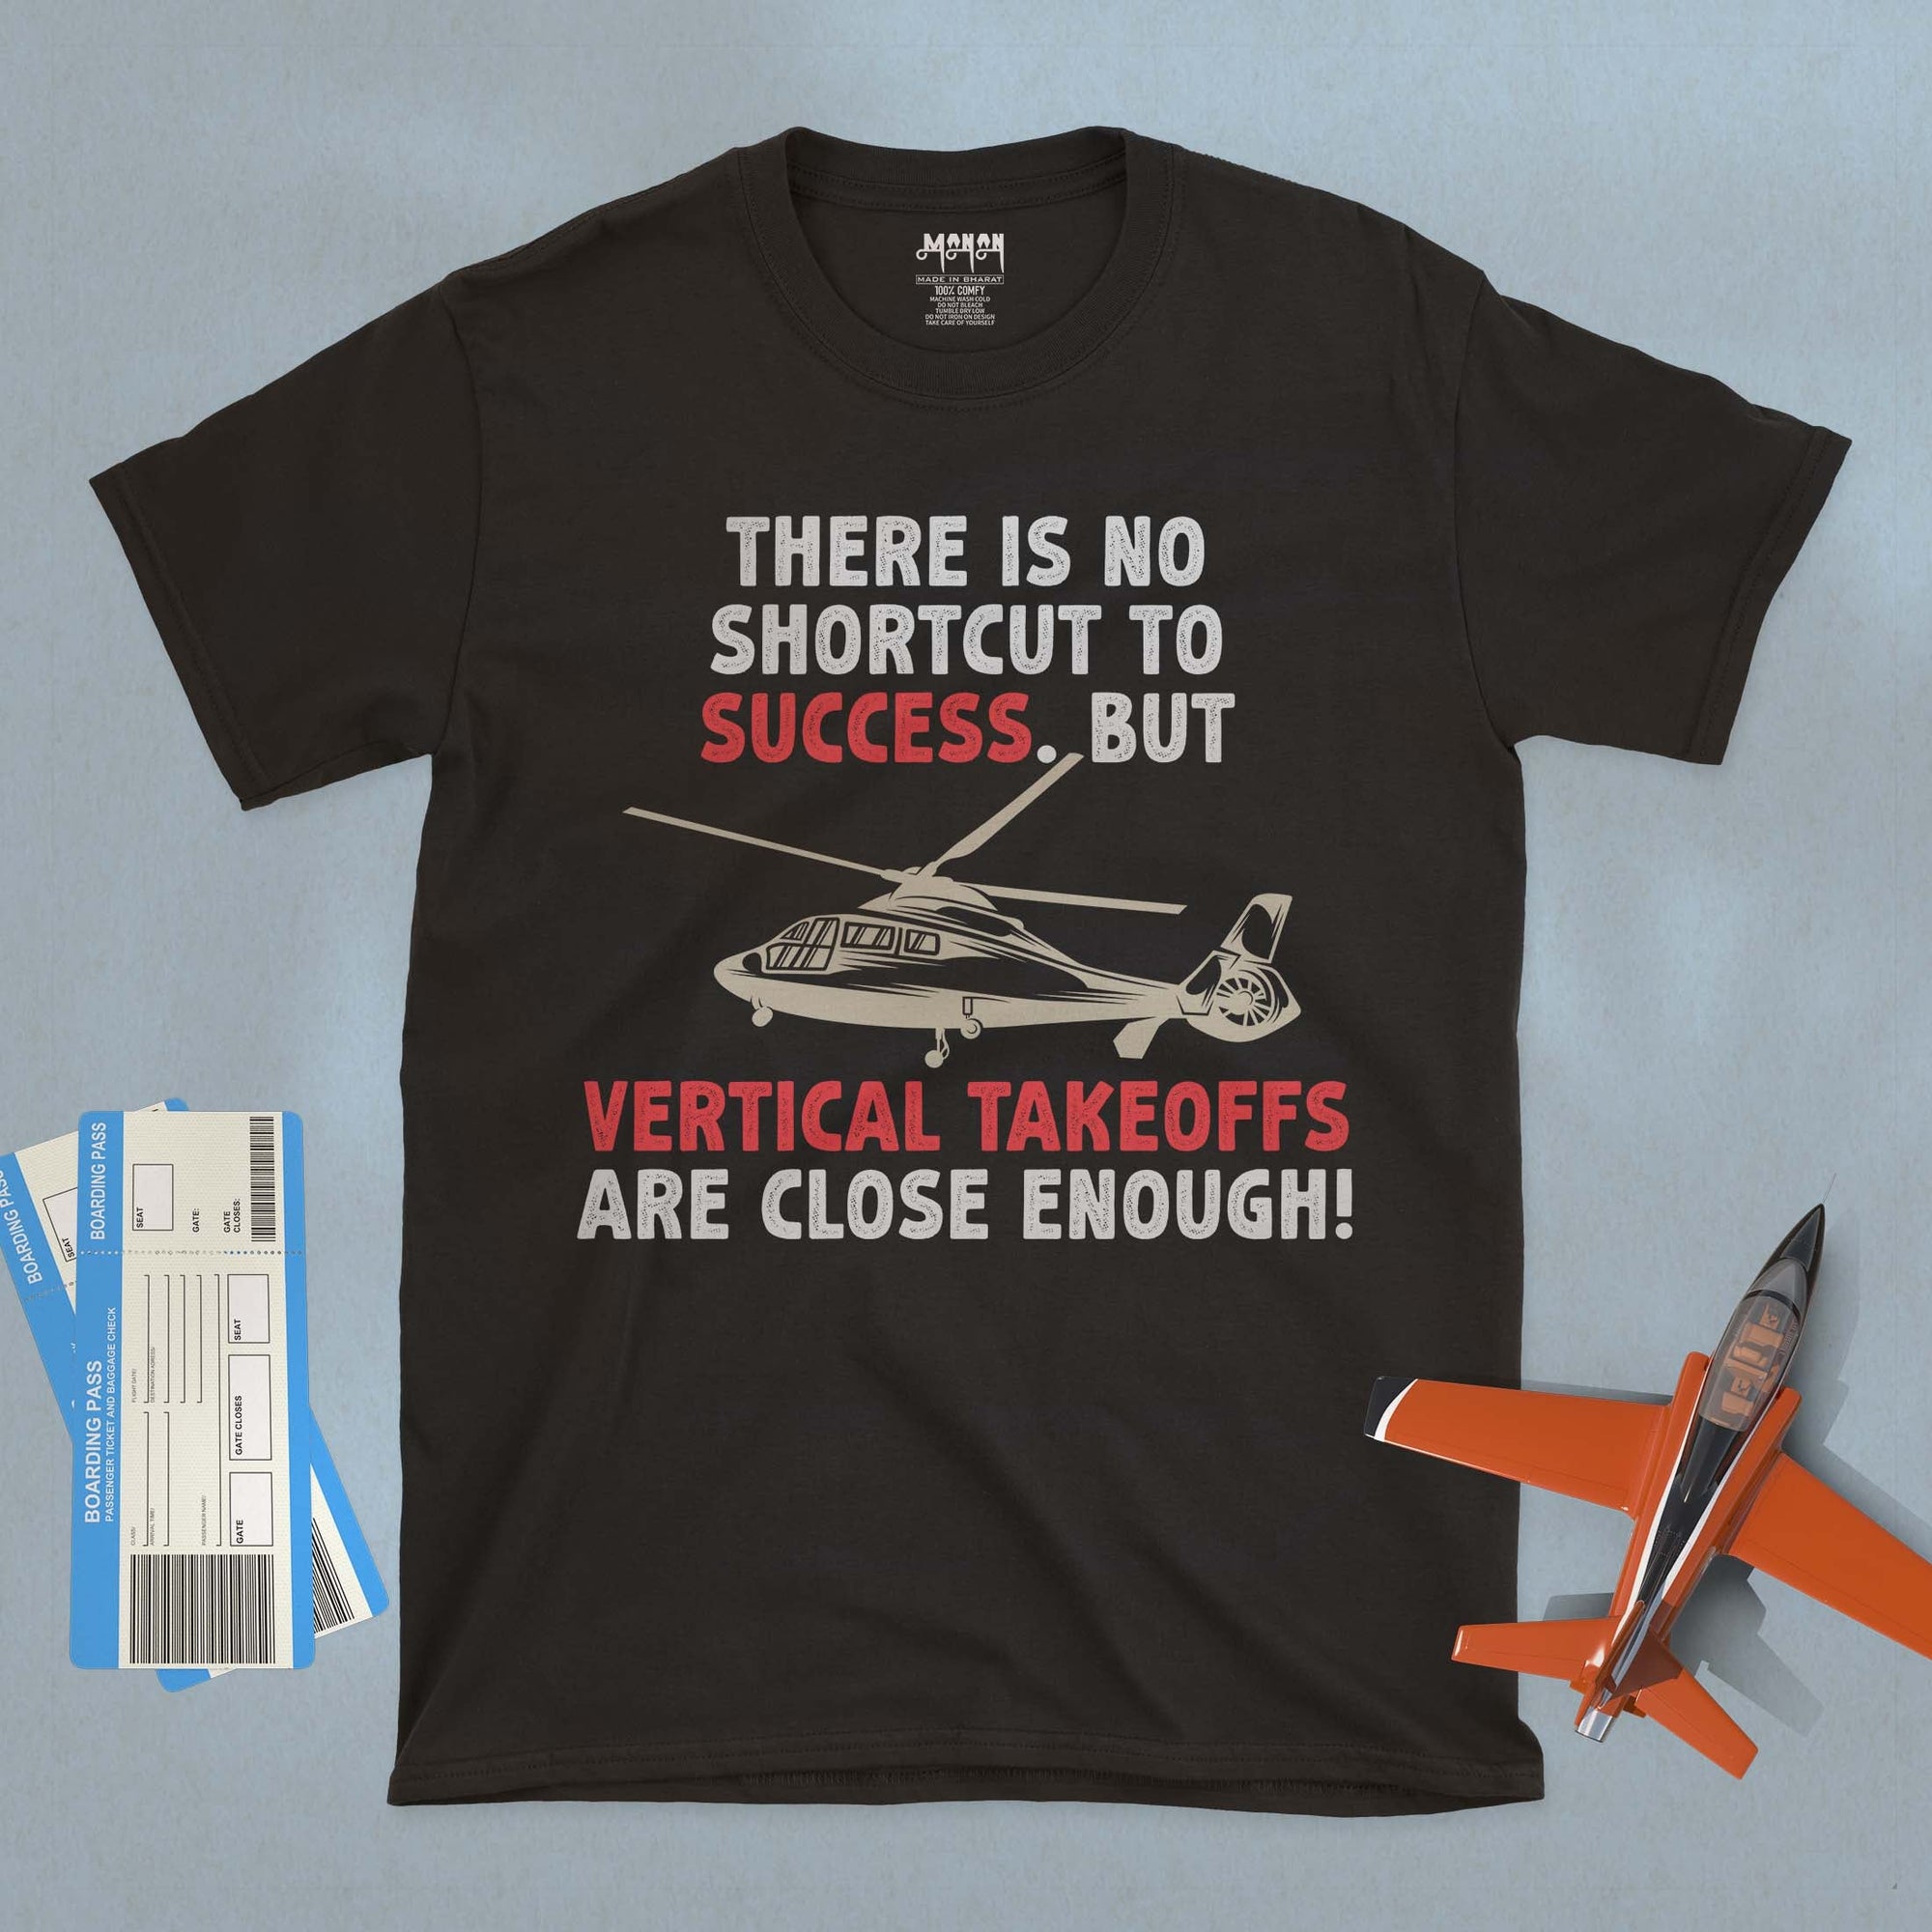 Vertical Takeoffs - Unisex T-shirt For Helicopter Pilots